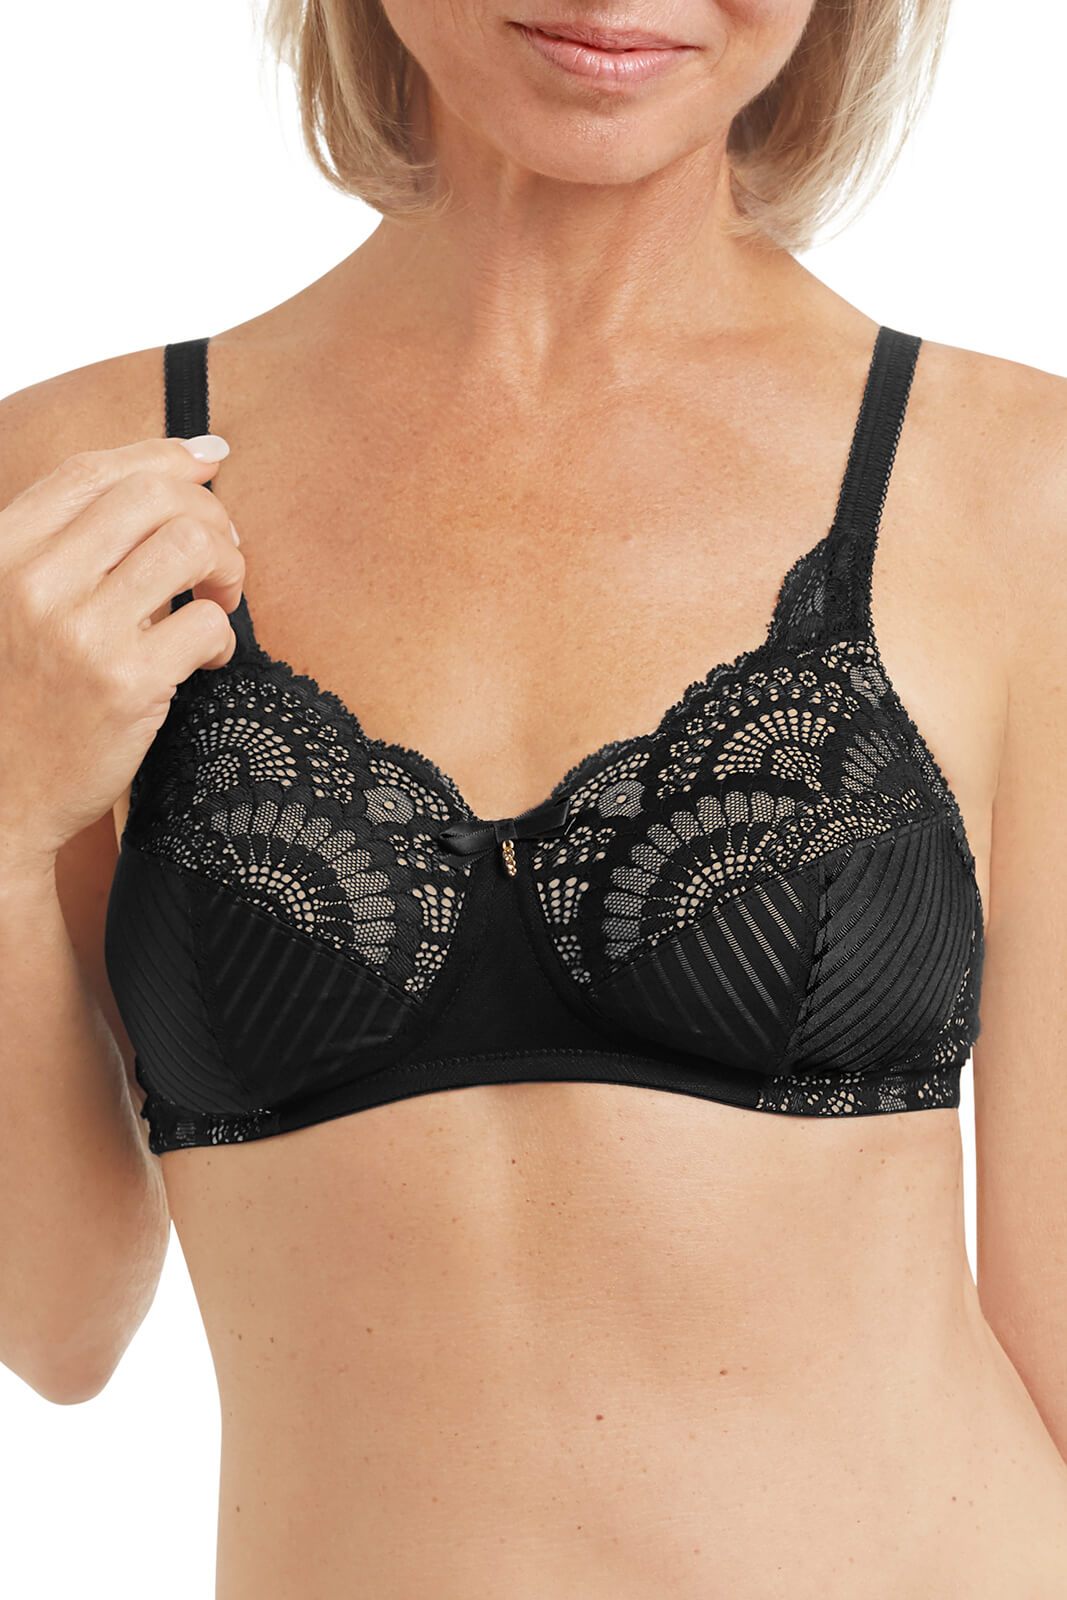 Amoena Bella Wire-free Bra-DISCONTINUED - Select Sizes & Colors Available